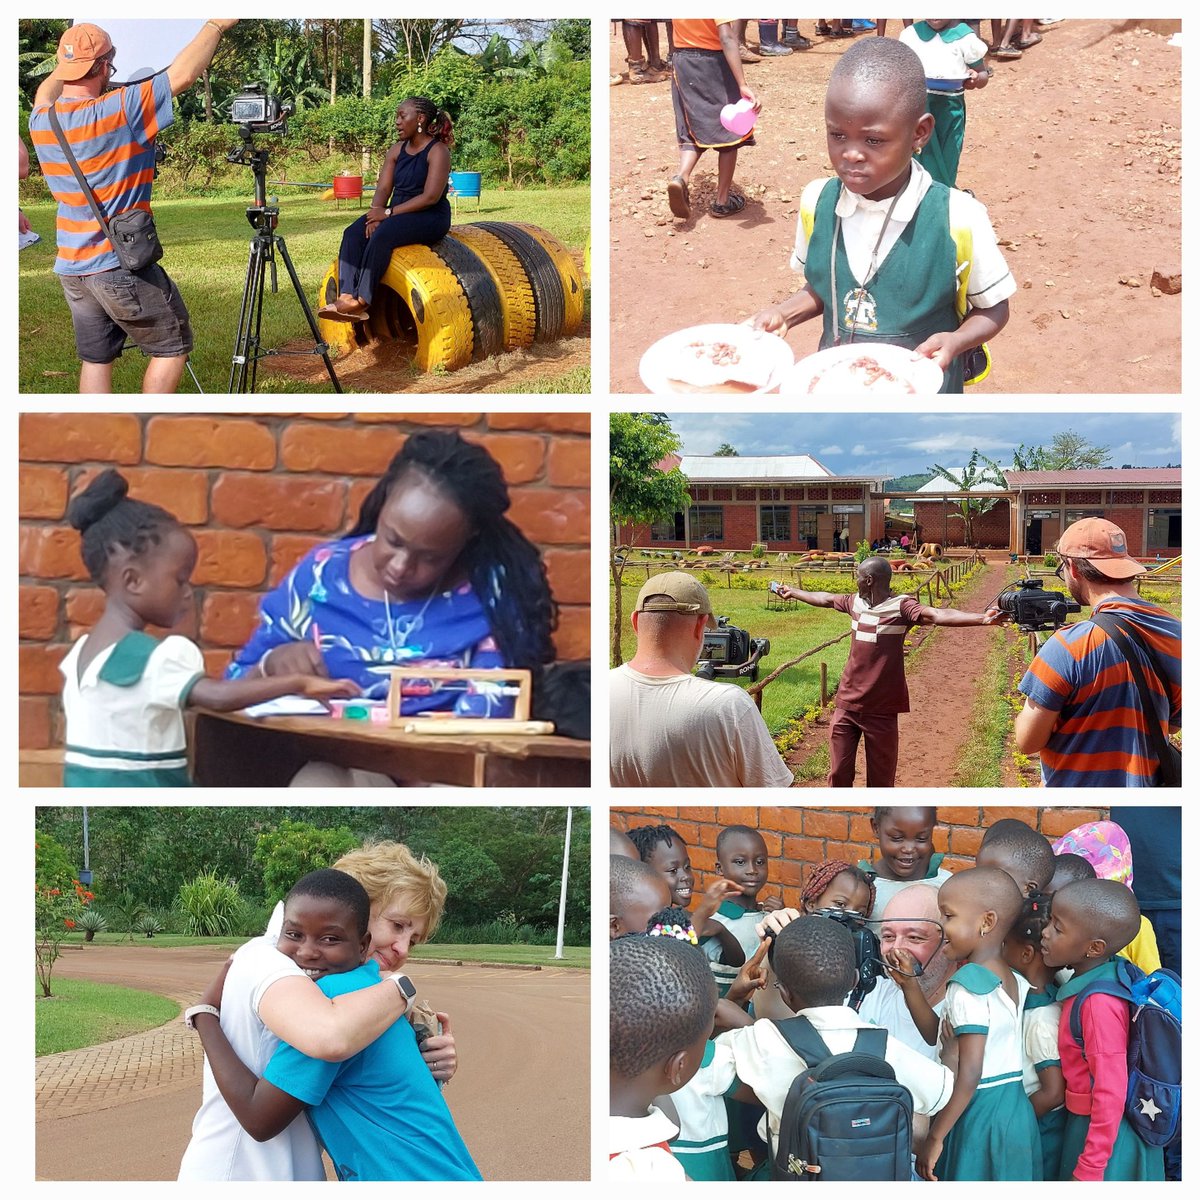 April at #JinjaEducationalTrust
Another fab trustee visit, another wonderful team from Toucan capturing our best, stacks more training, new partnerships, construction, strategic planning. Keep watching us as we're moving fast! #educationempowers #filming #planforsuccess #uganda🇺🇬